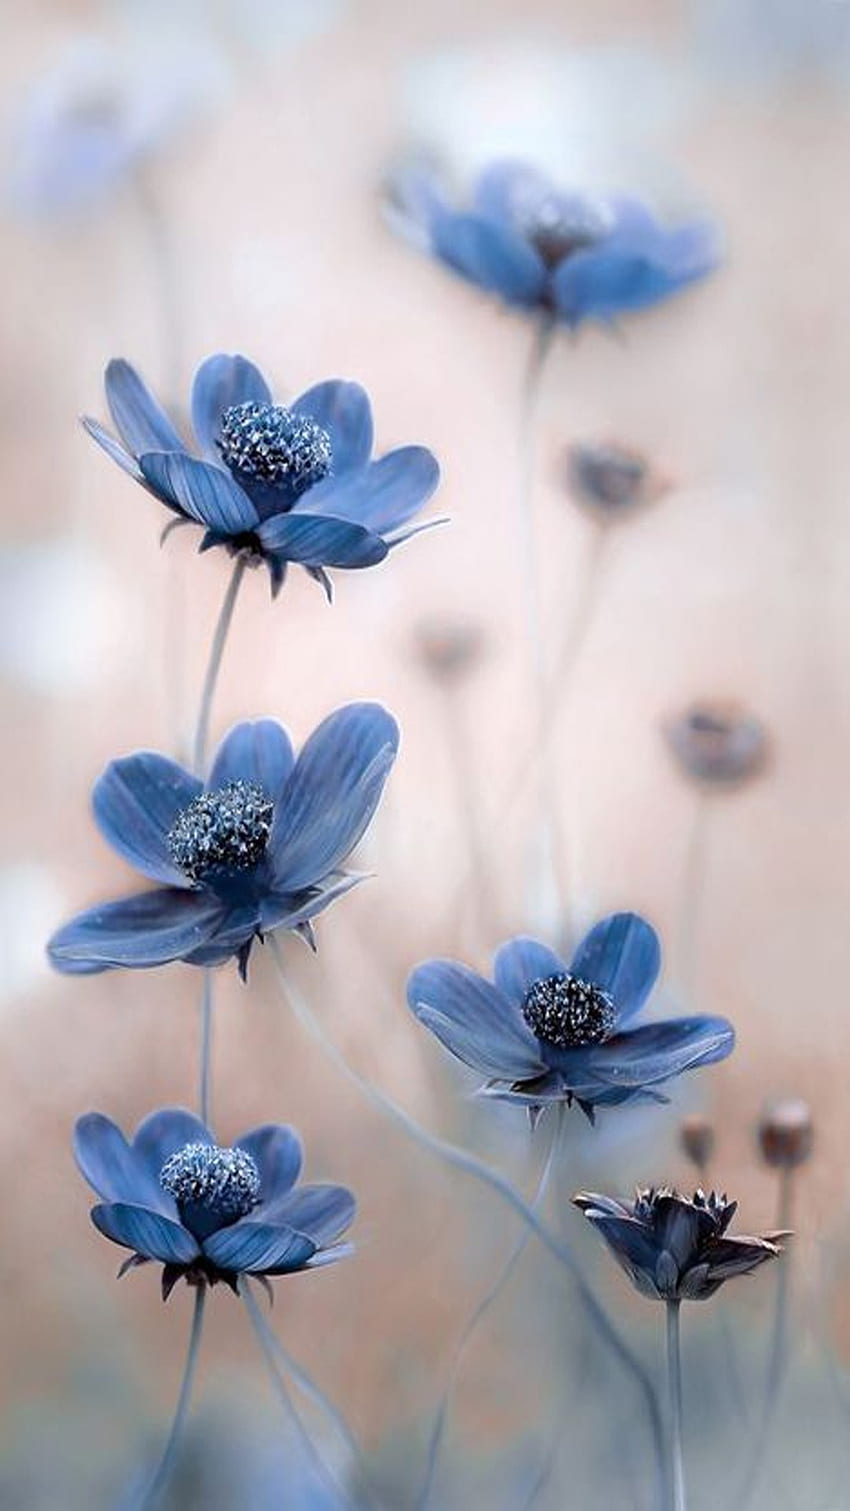 420 Blue Flower HD Wallpapers and Backgrounds